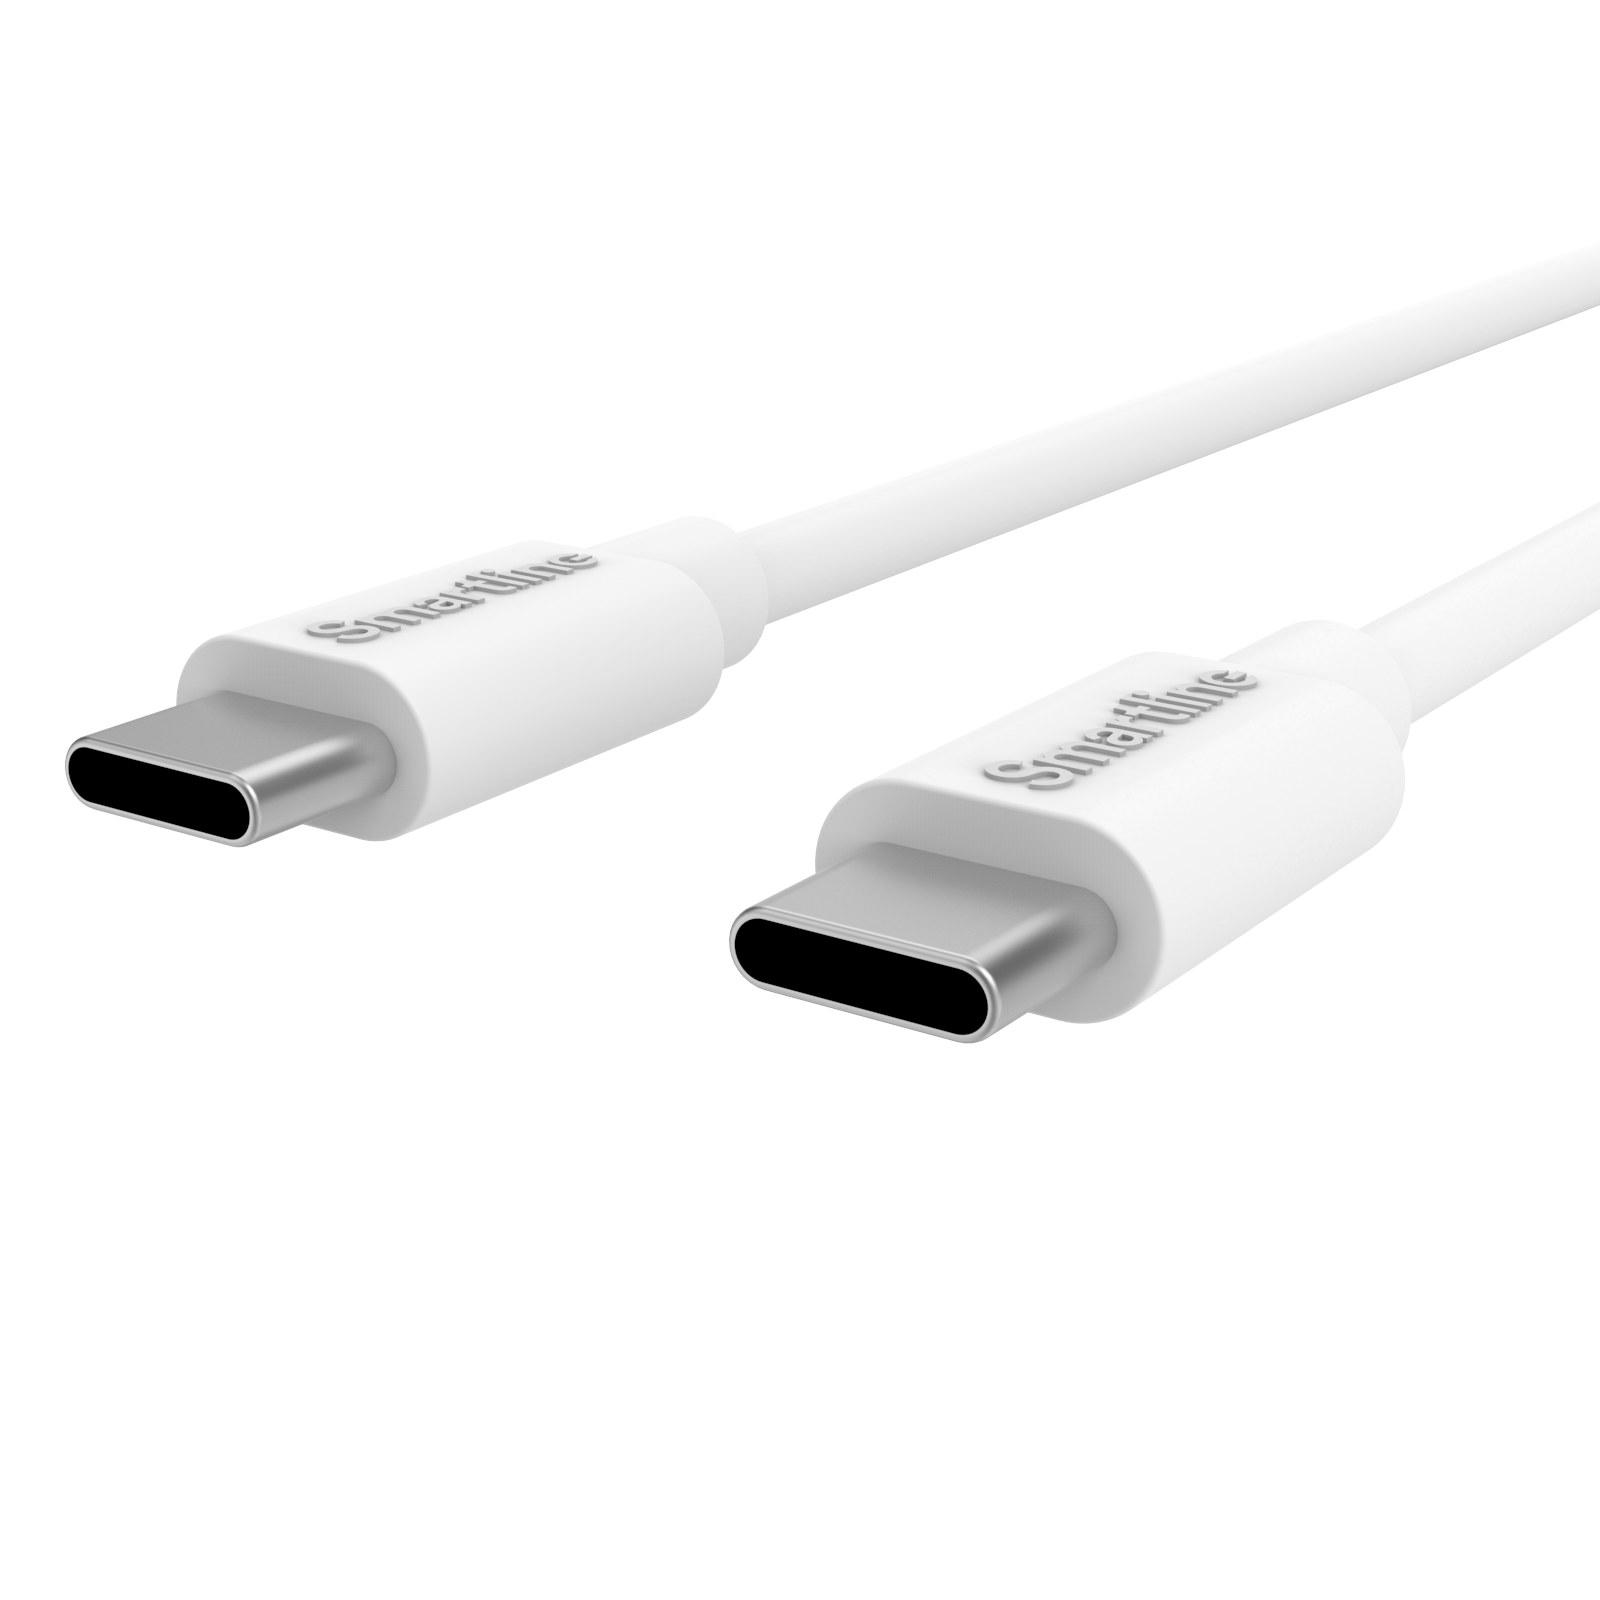 Complete Charger Motorola Moto E14 - 2 meter Cable and Wall Charger USB-C - Smartline